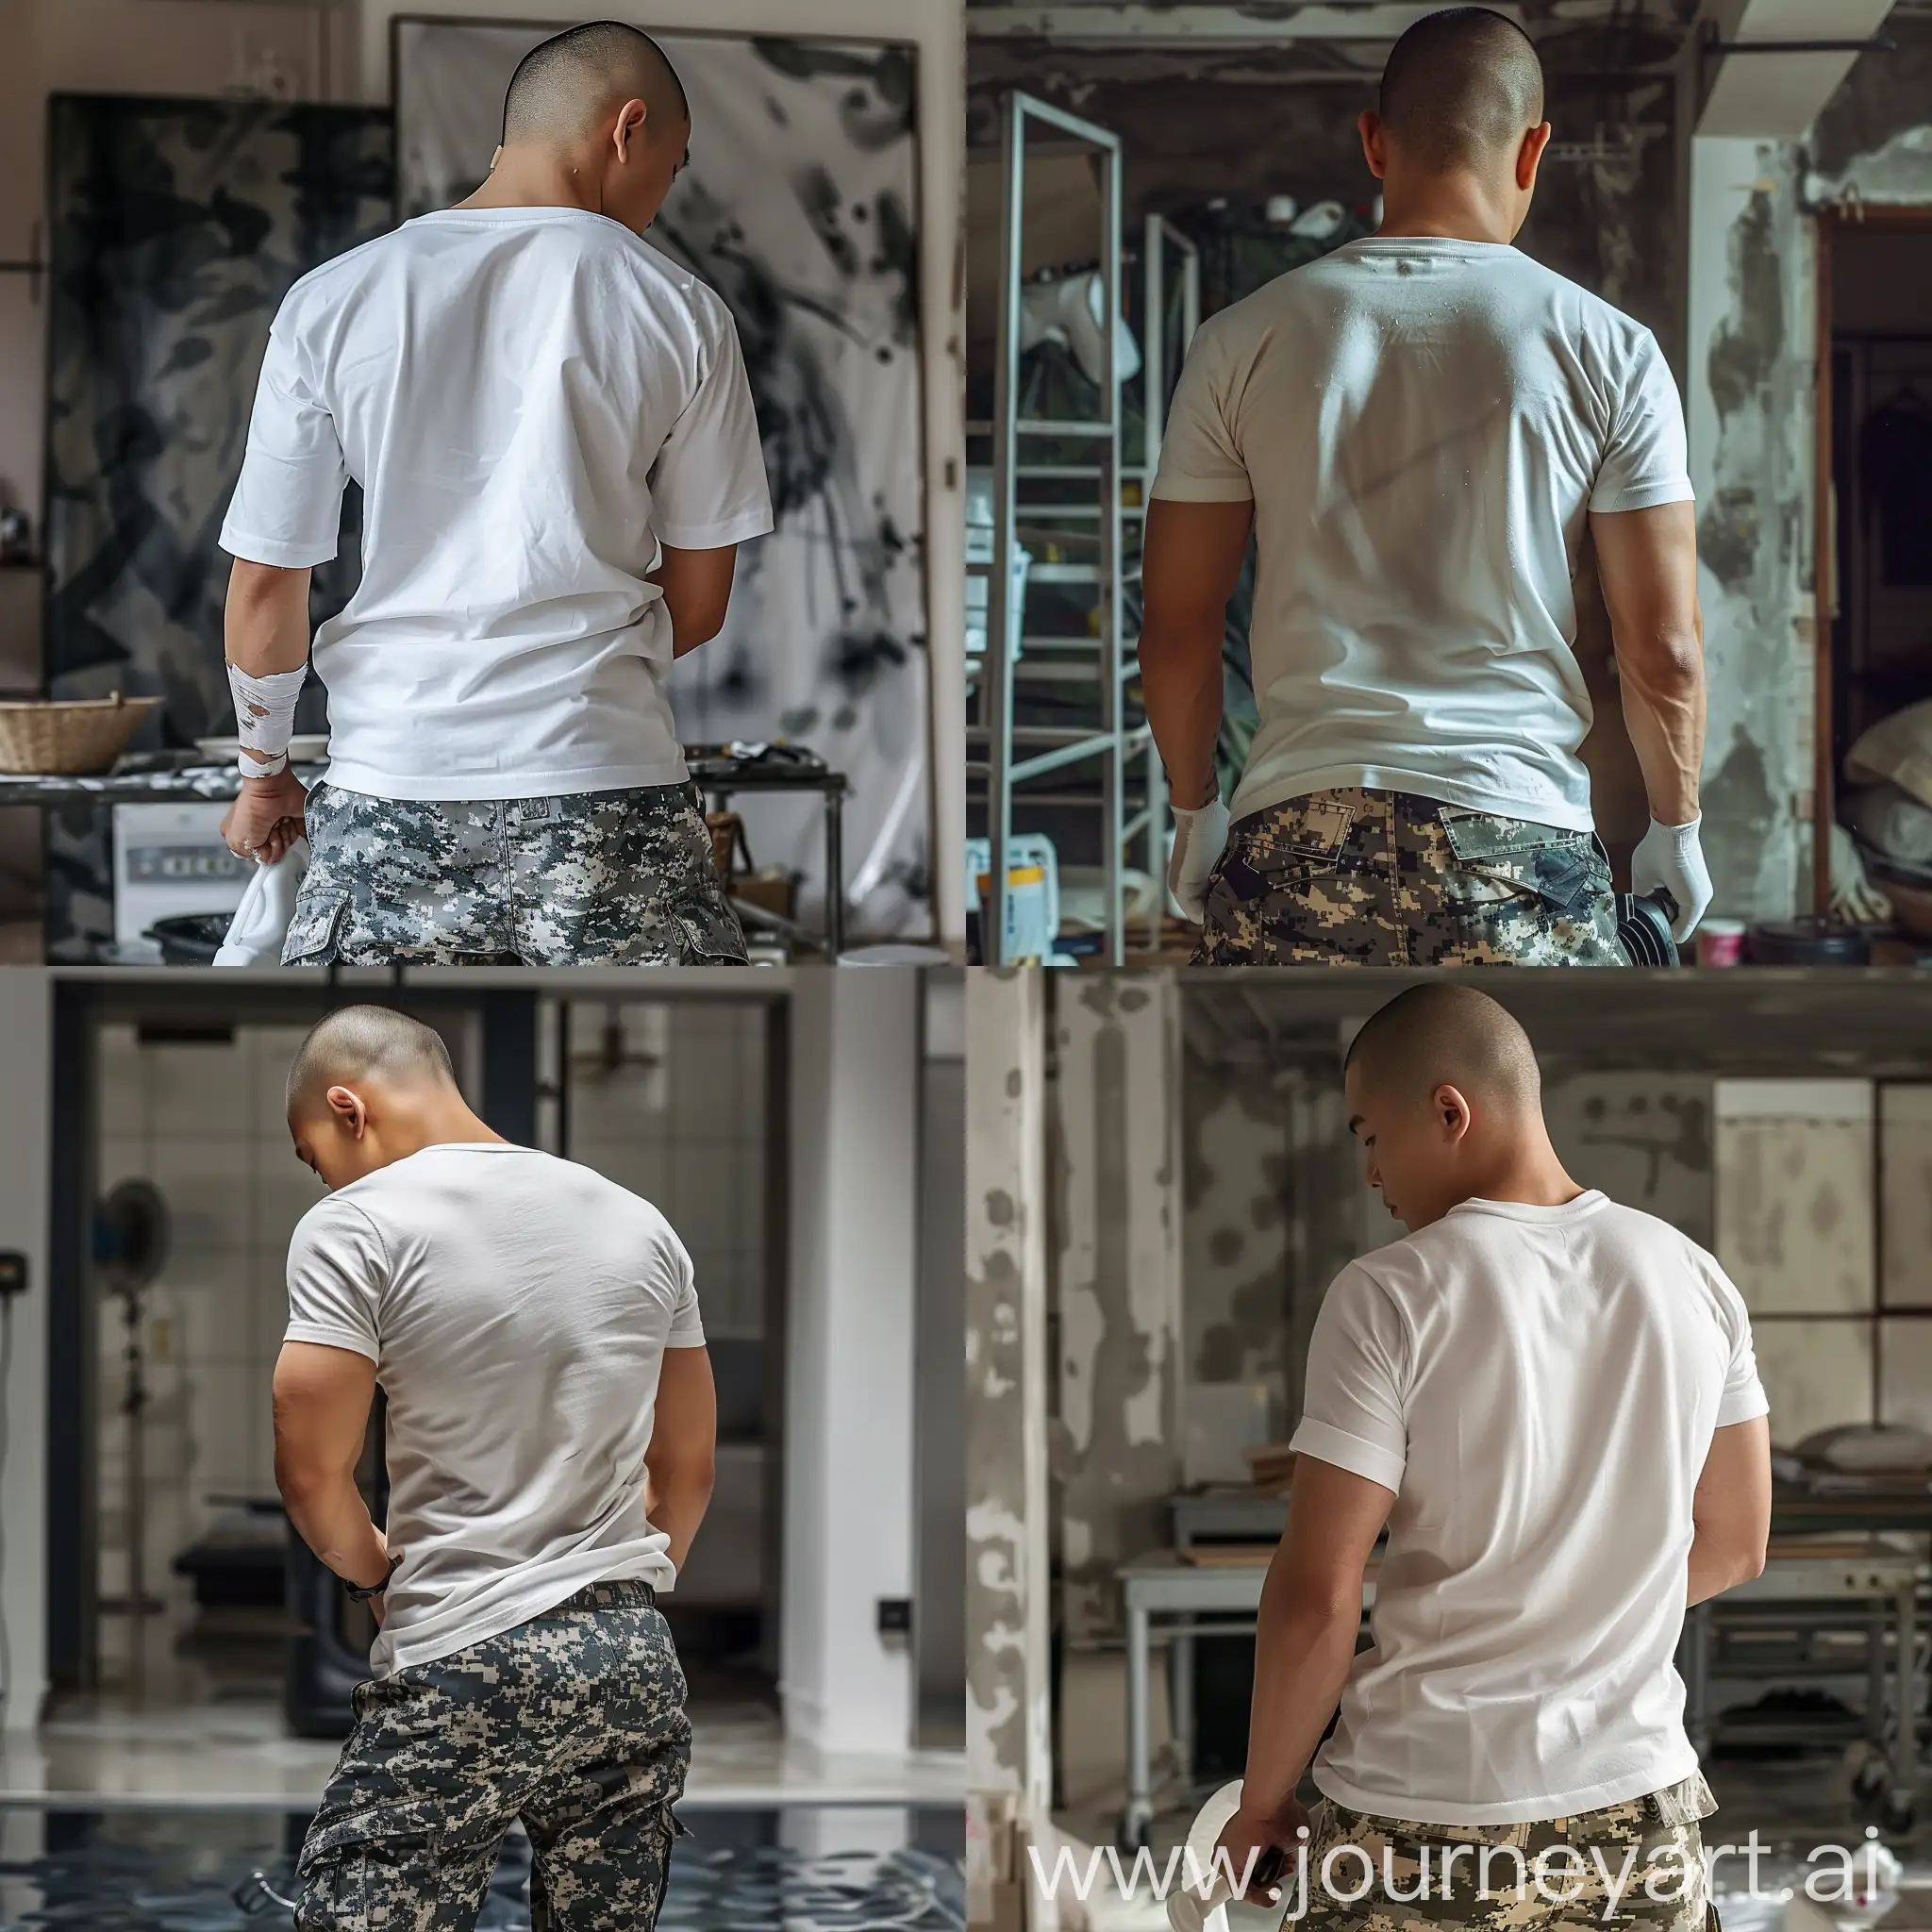 Asian-Male-Soldier-Cleaning-Floor-in-Military-Attire